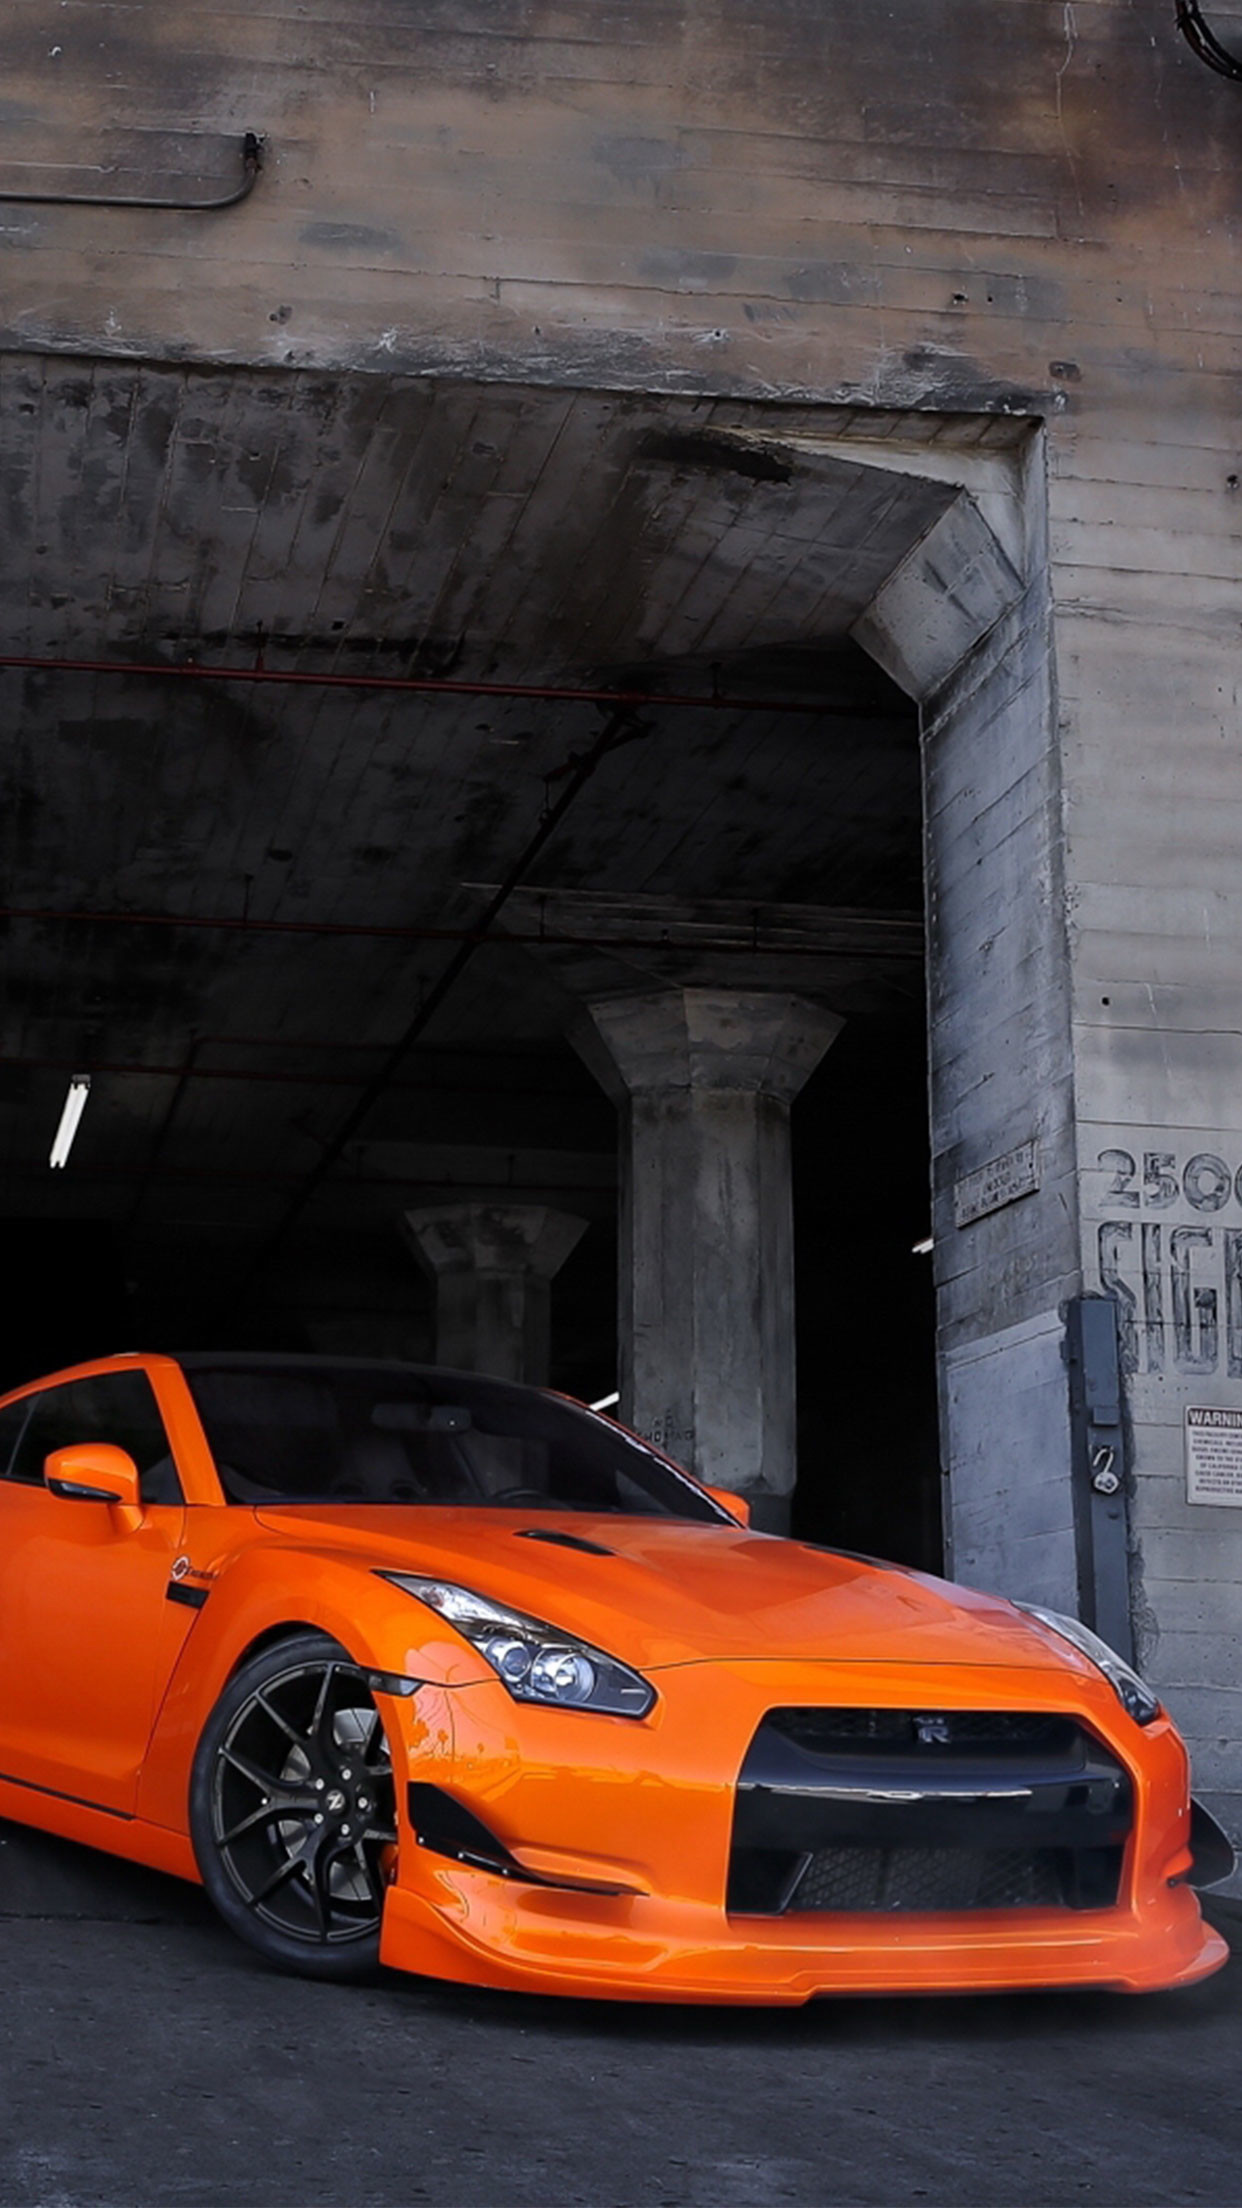 1242x2208 Nissan car wallpaper #Iphone #android #nissan #car more on wallzapp.com